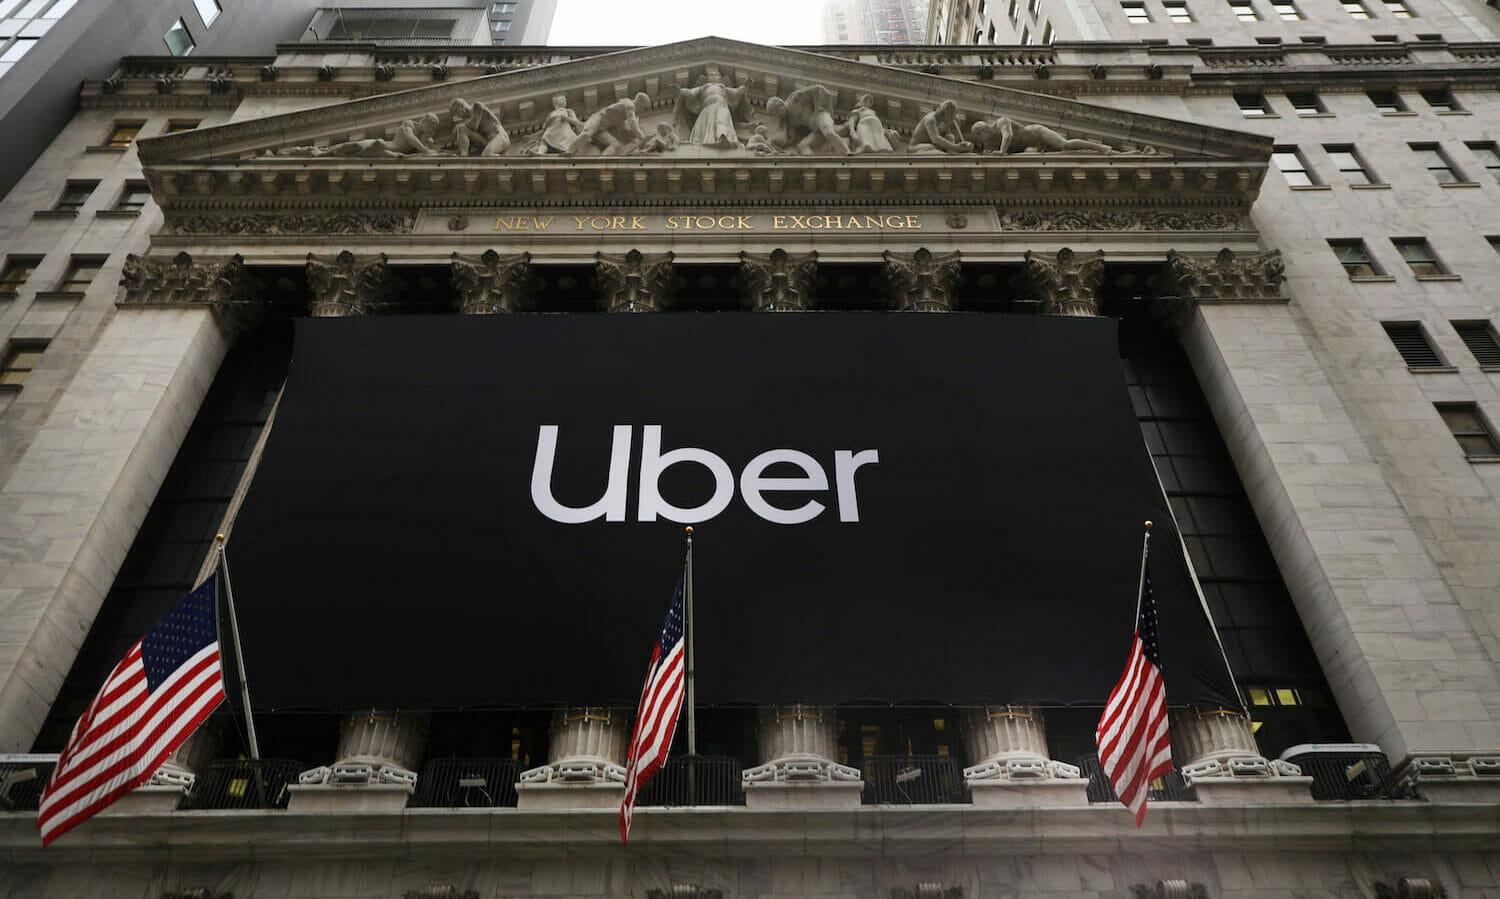 A banner with Uber's logo hangs outside the New York Stock Exchange